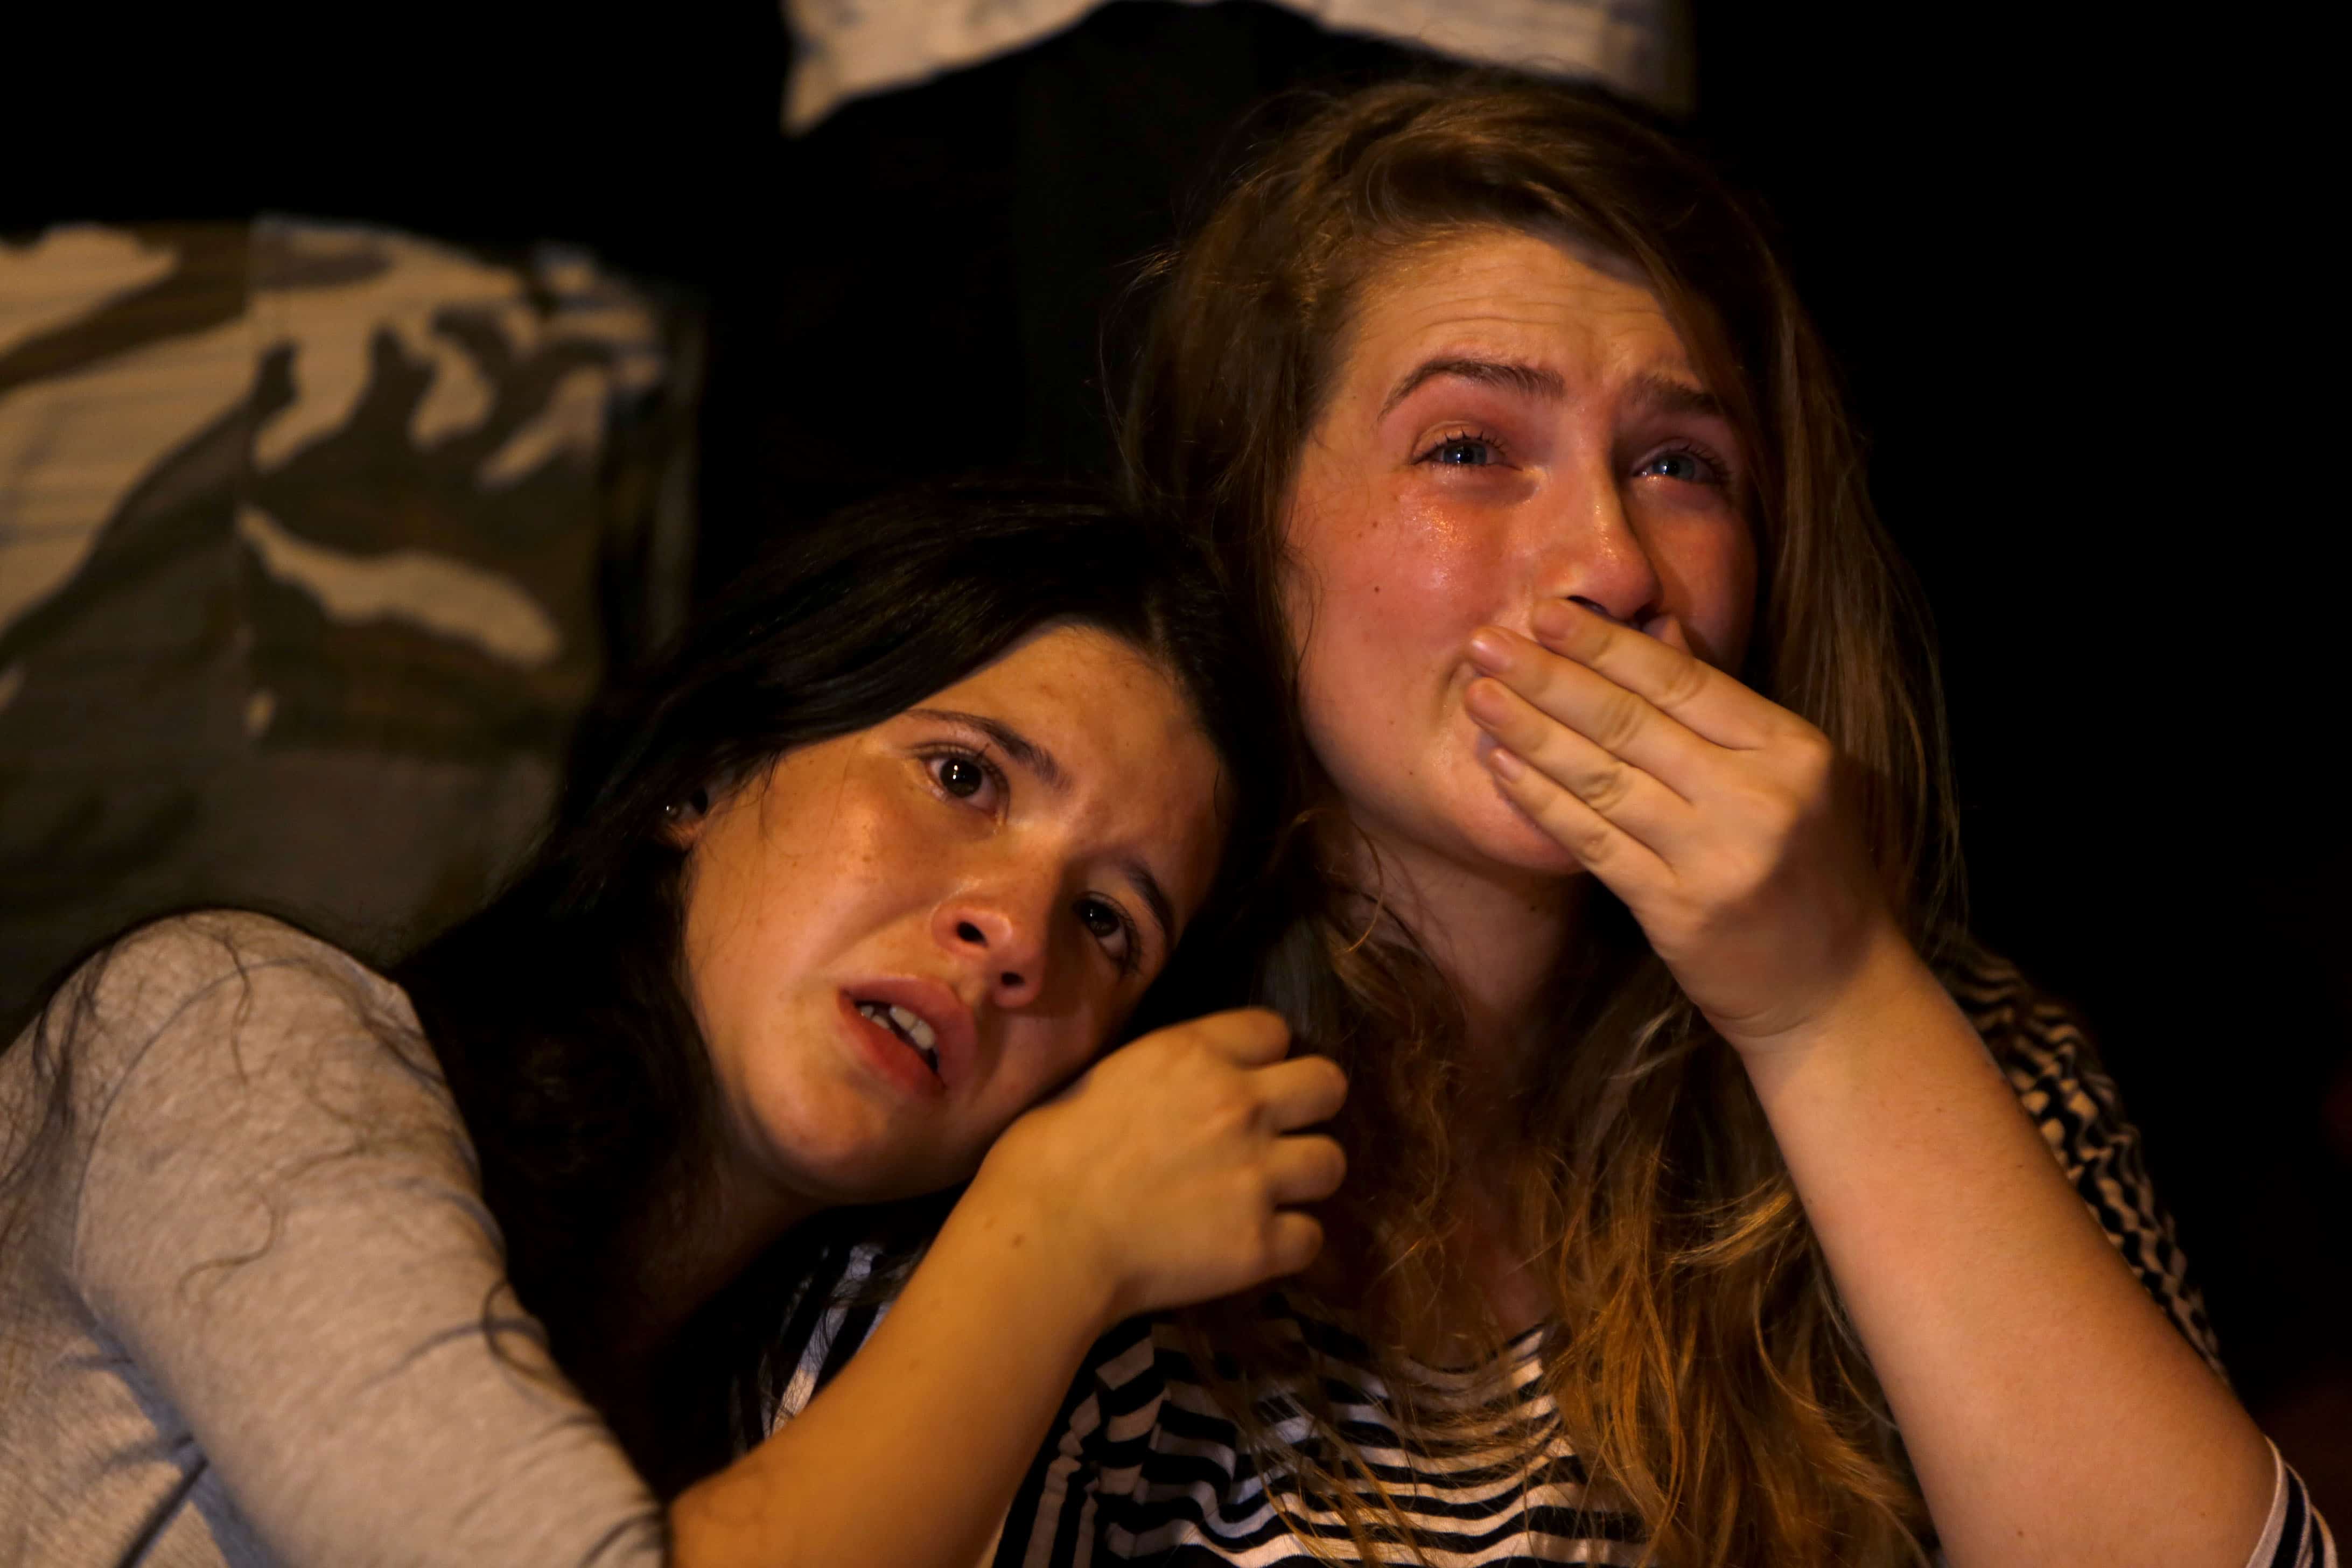 Israeli girls cry during a gathering of hundreds of friends, classmates, teachers, members of the gay community and supporters in downtown Jerusalem.